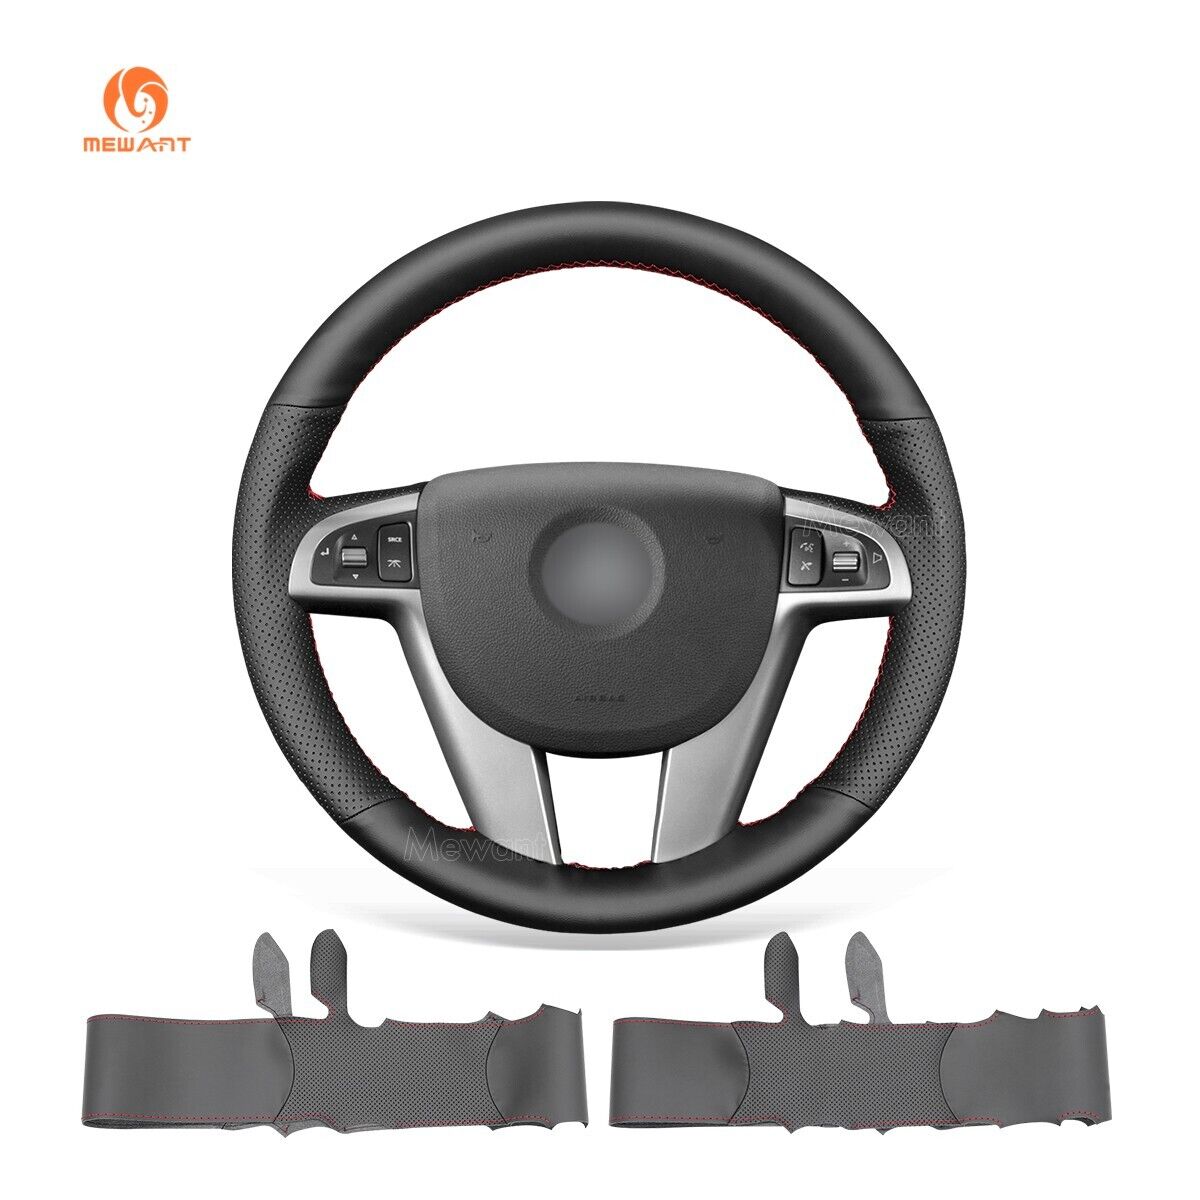 MEWANT Artificial Leather Steering Wheel Wrap for Holden Commodore Ute Calais